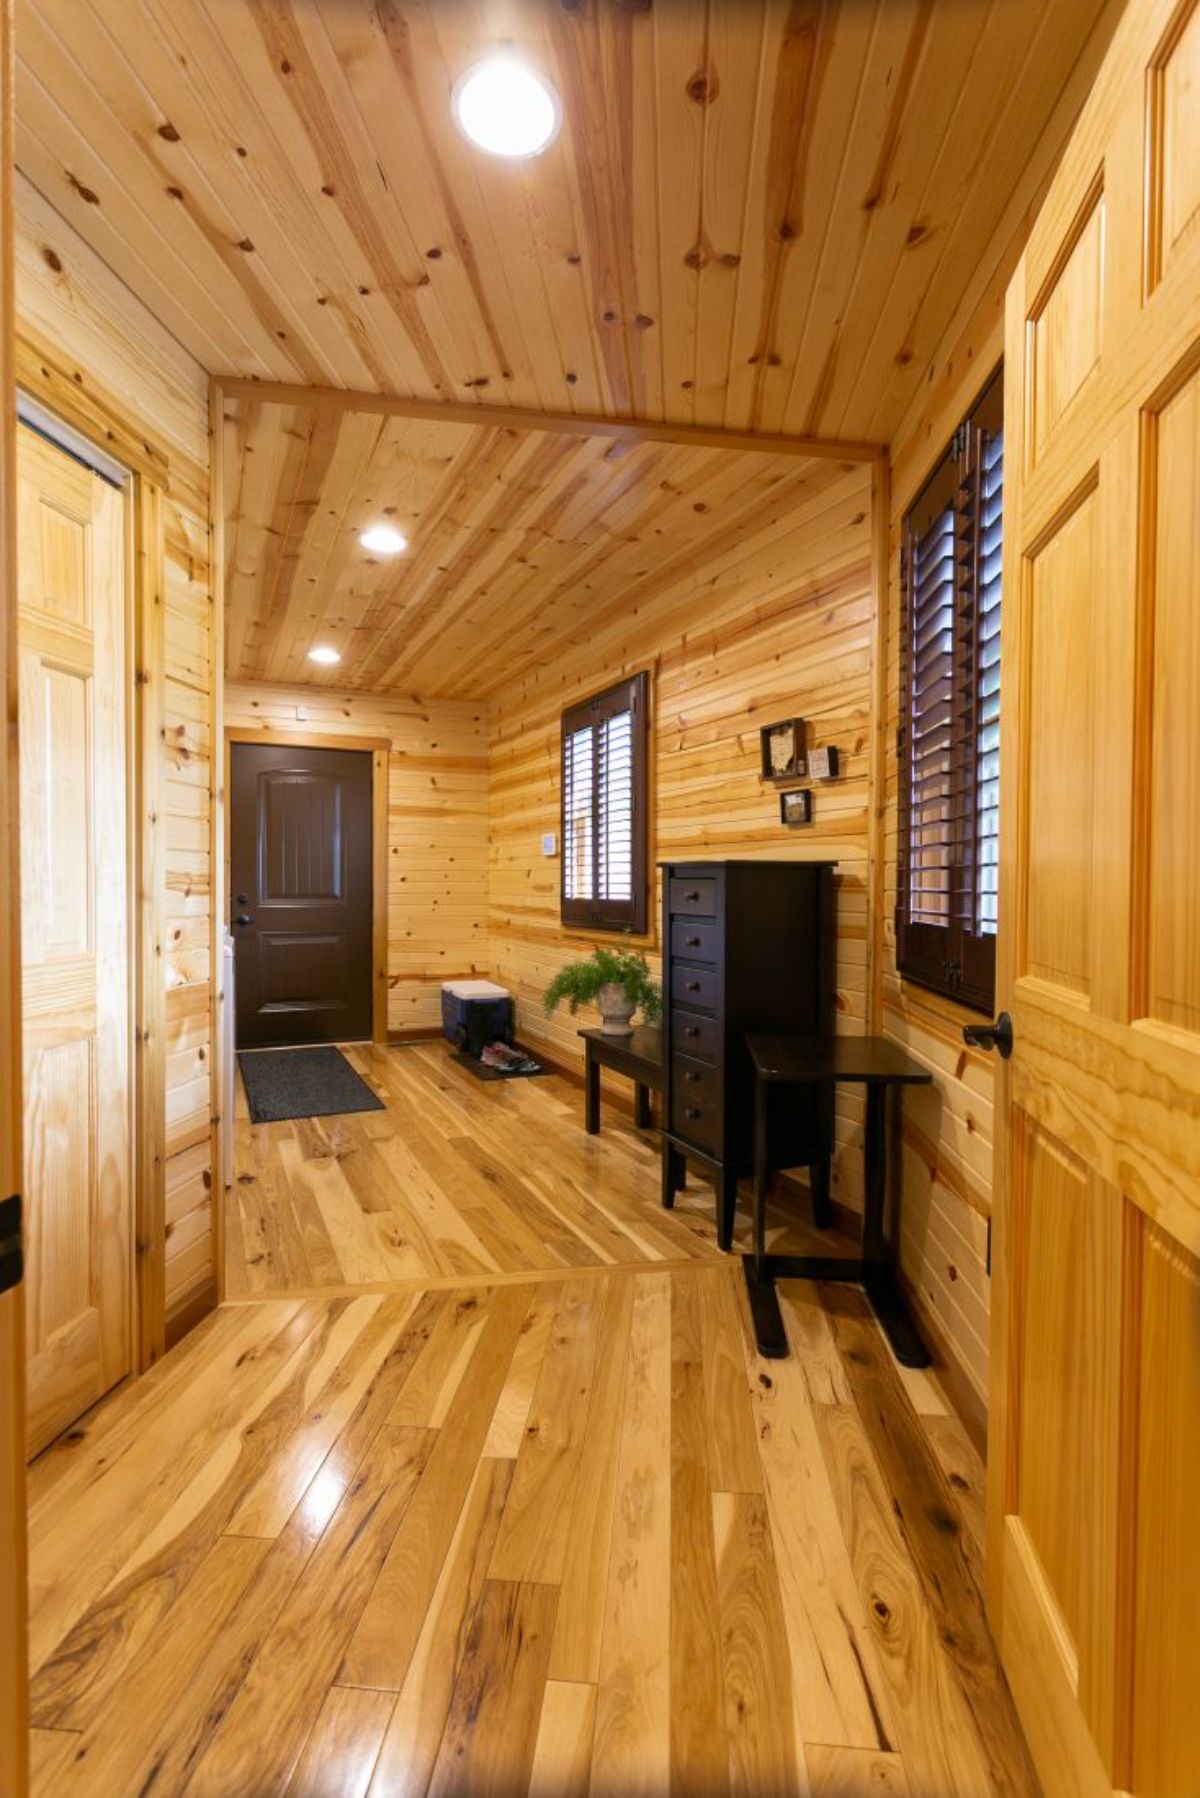 hall to front door with log and woodwork on walls floor and ceiling